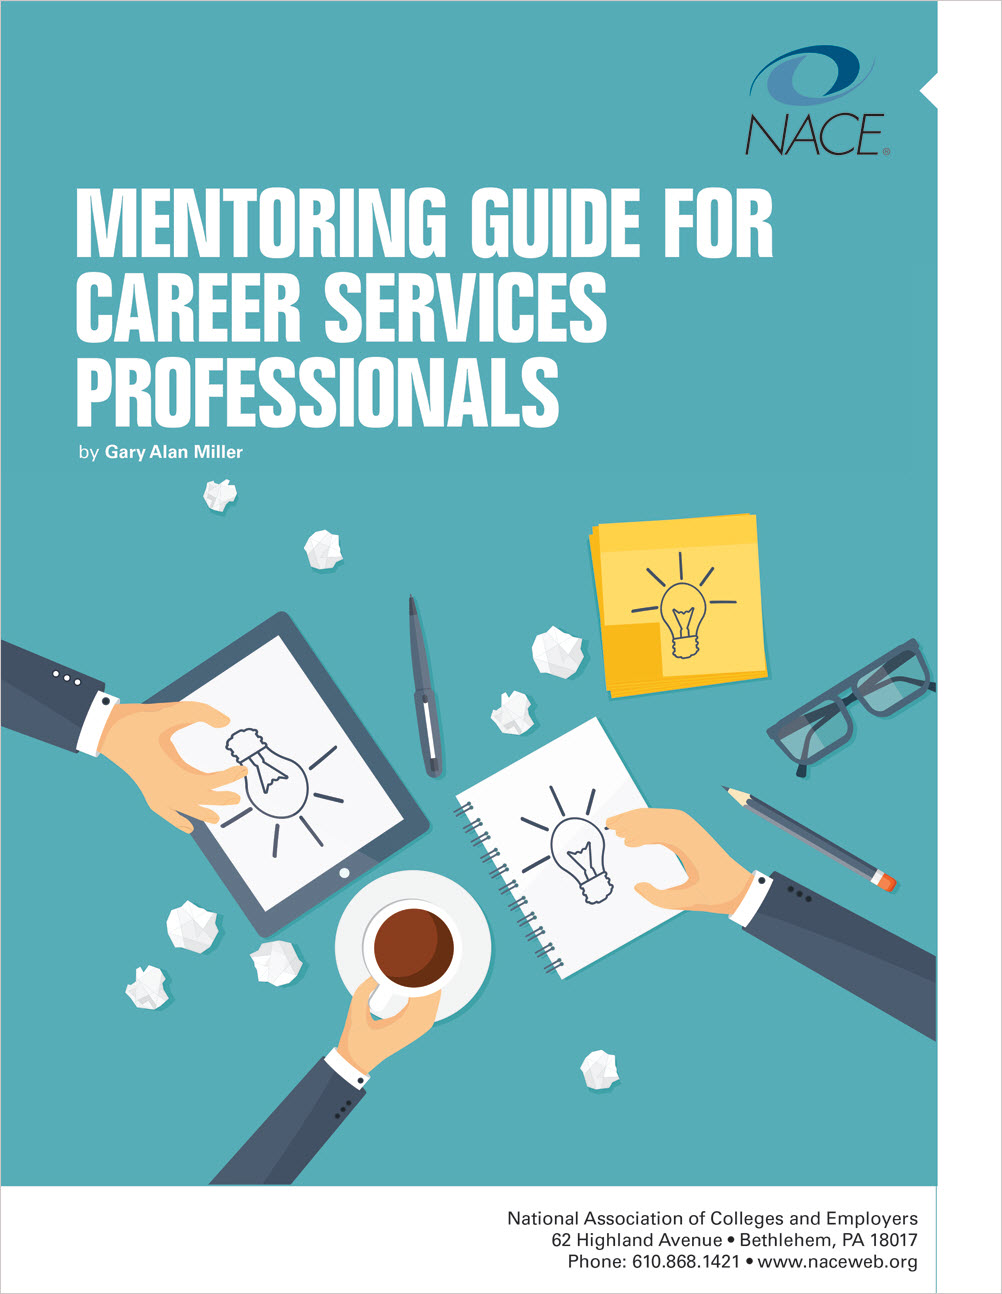 Mentoring Guide for Career Services